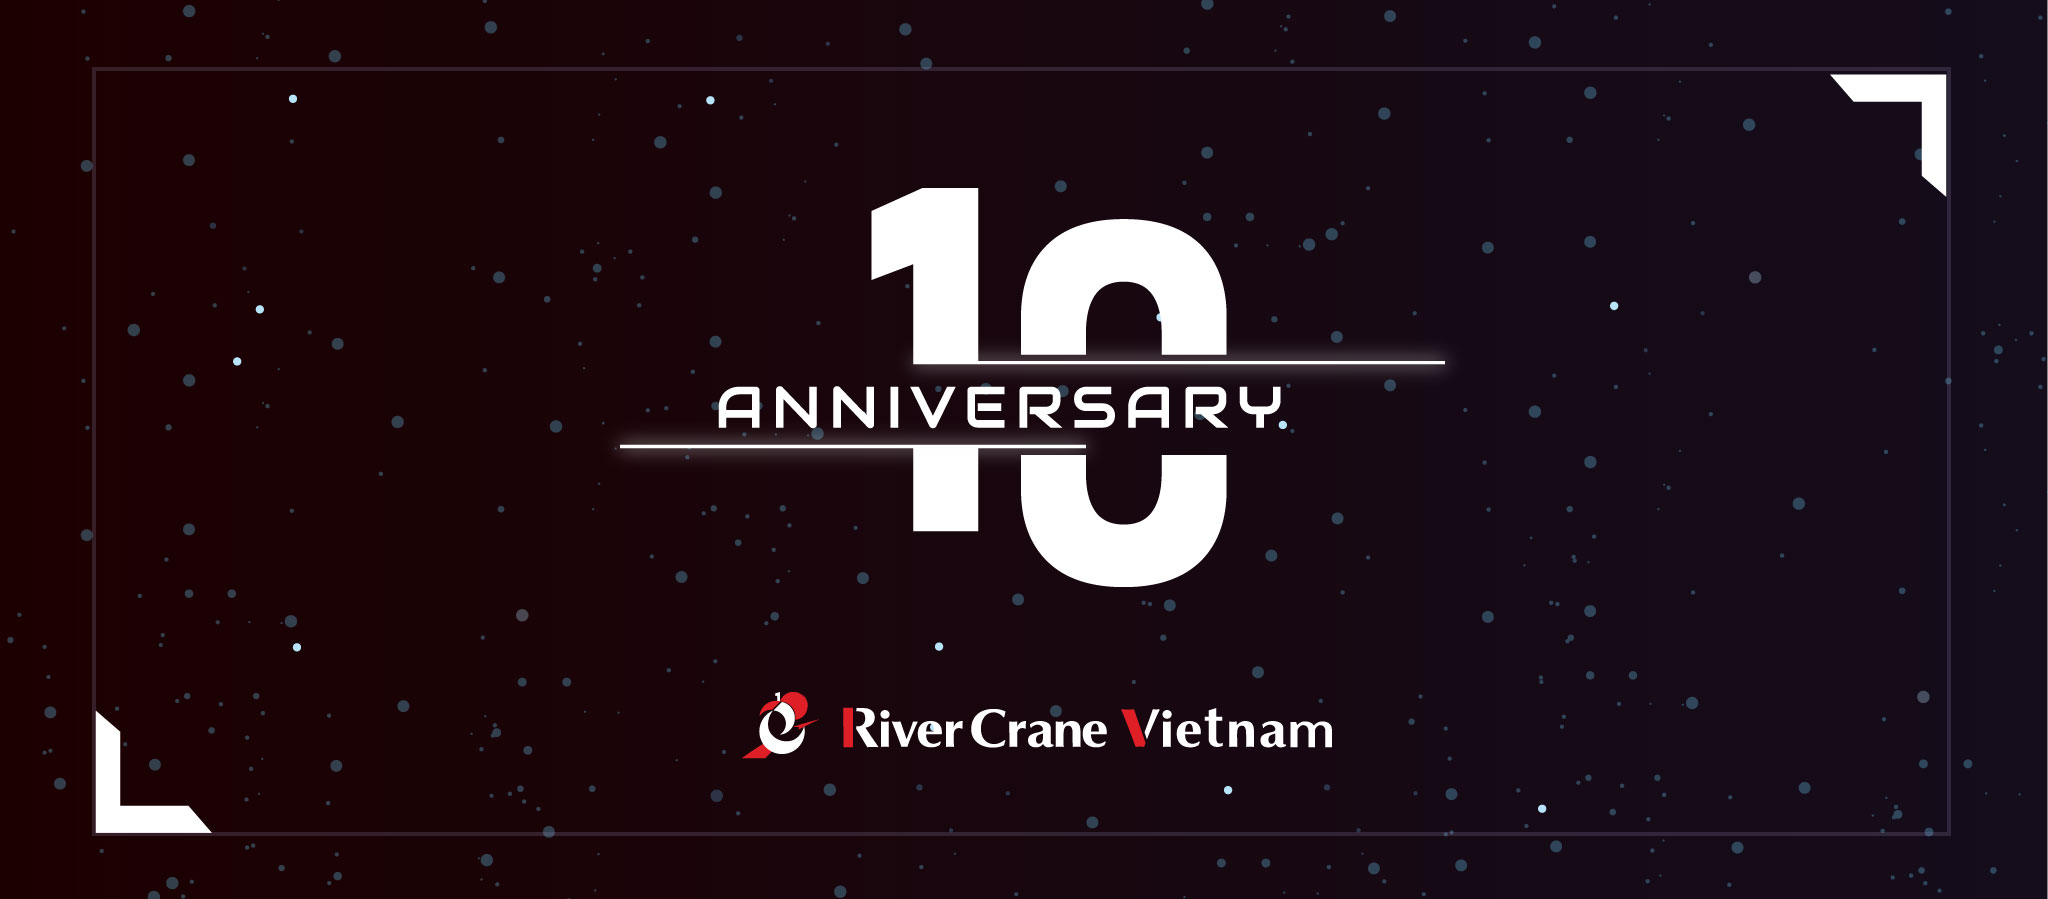 A DECADE OF GROWTH – A GIFT FOR RCVNERS